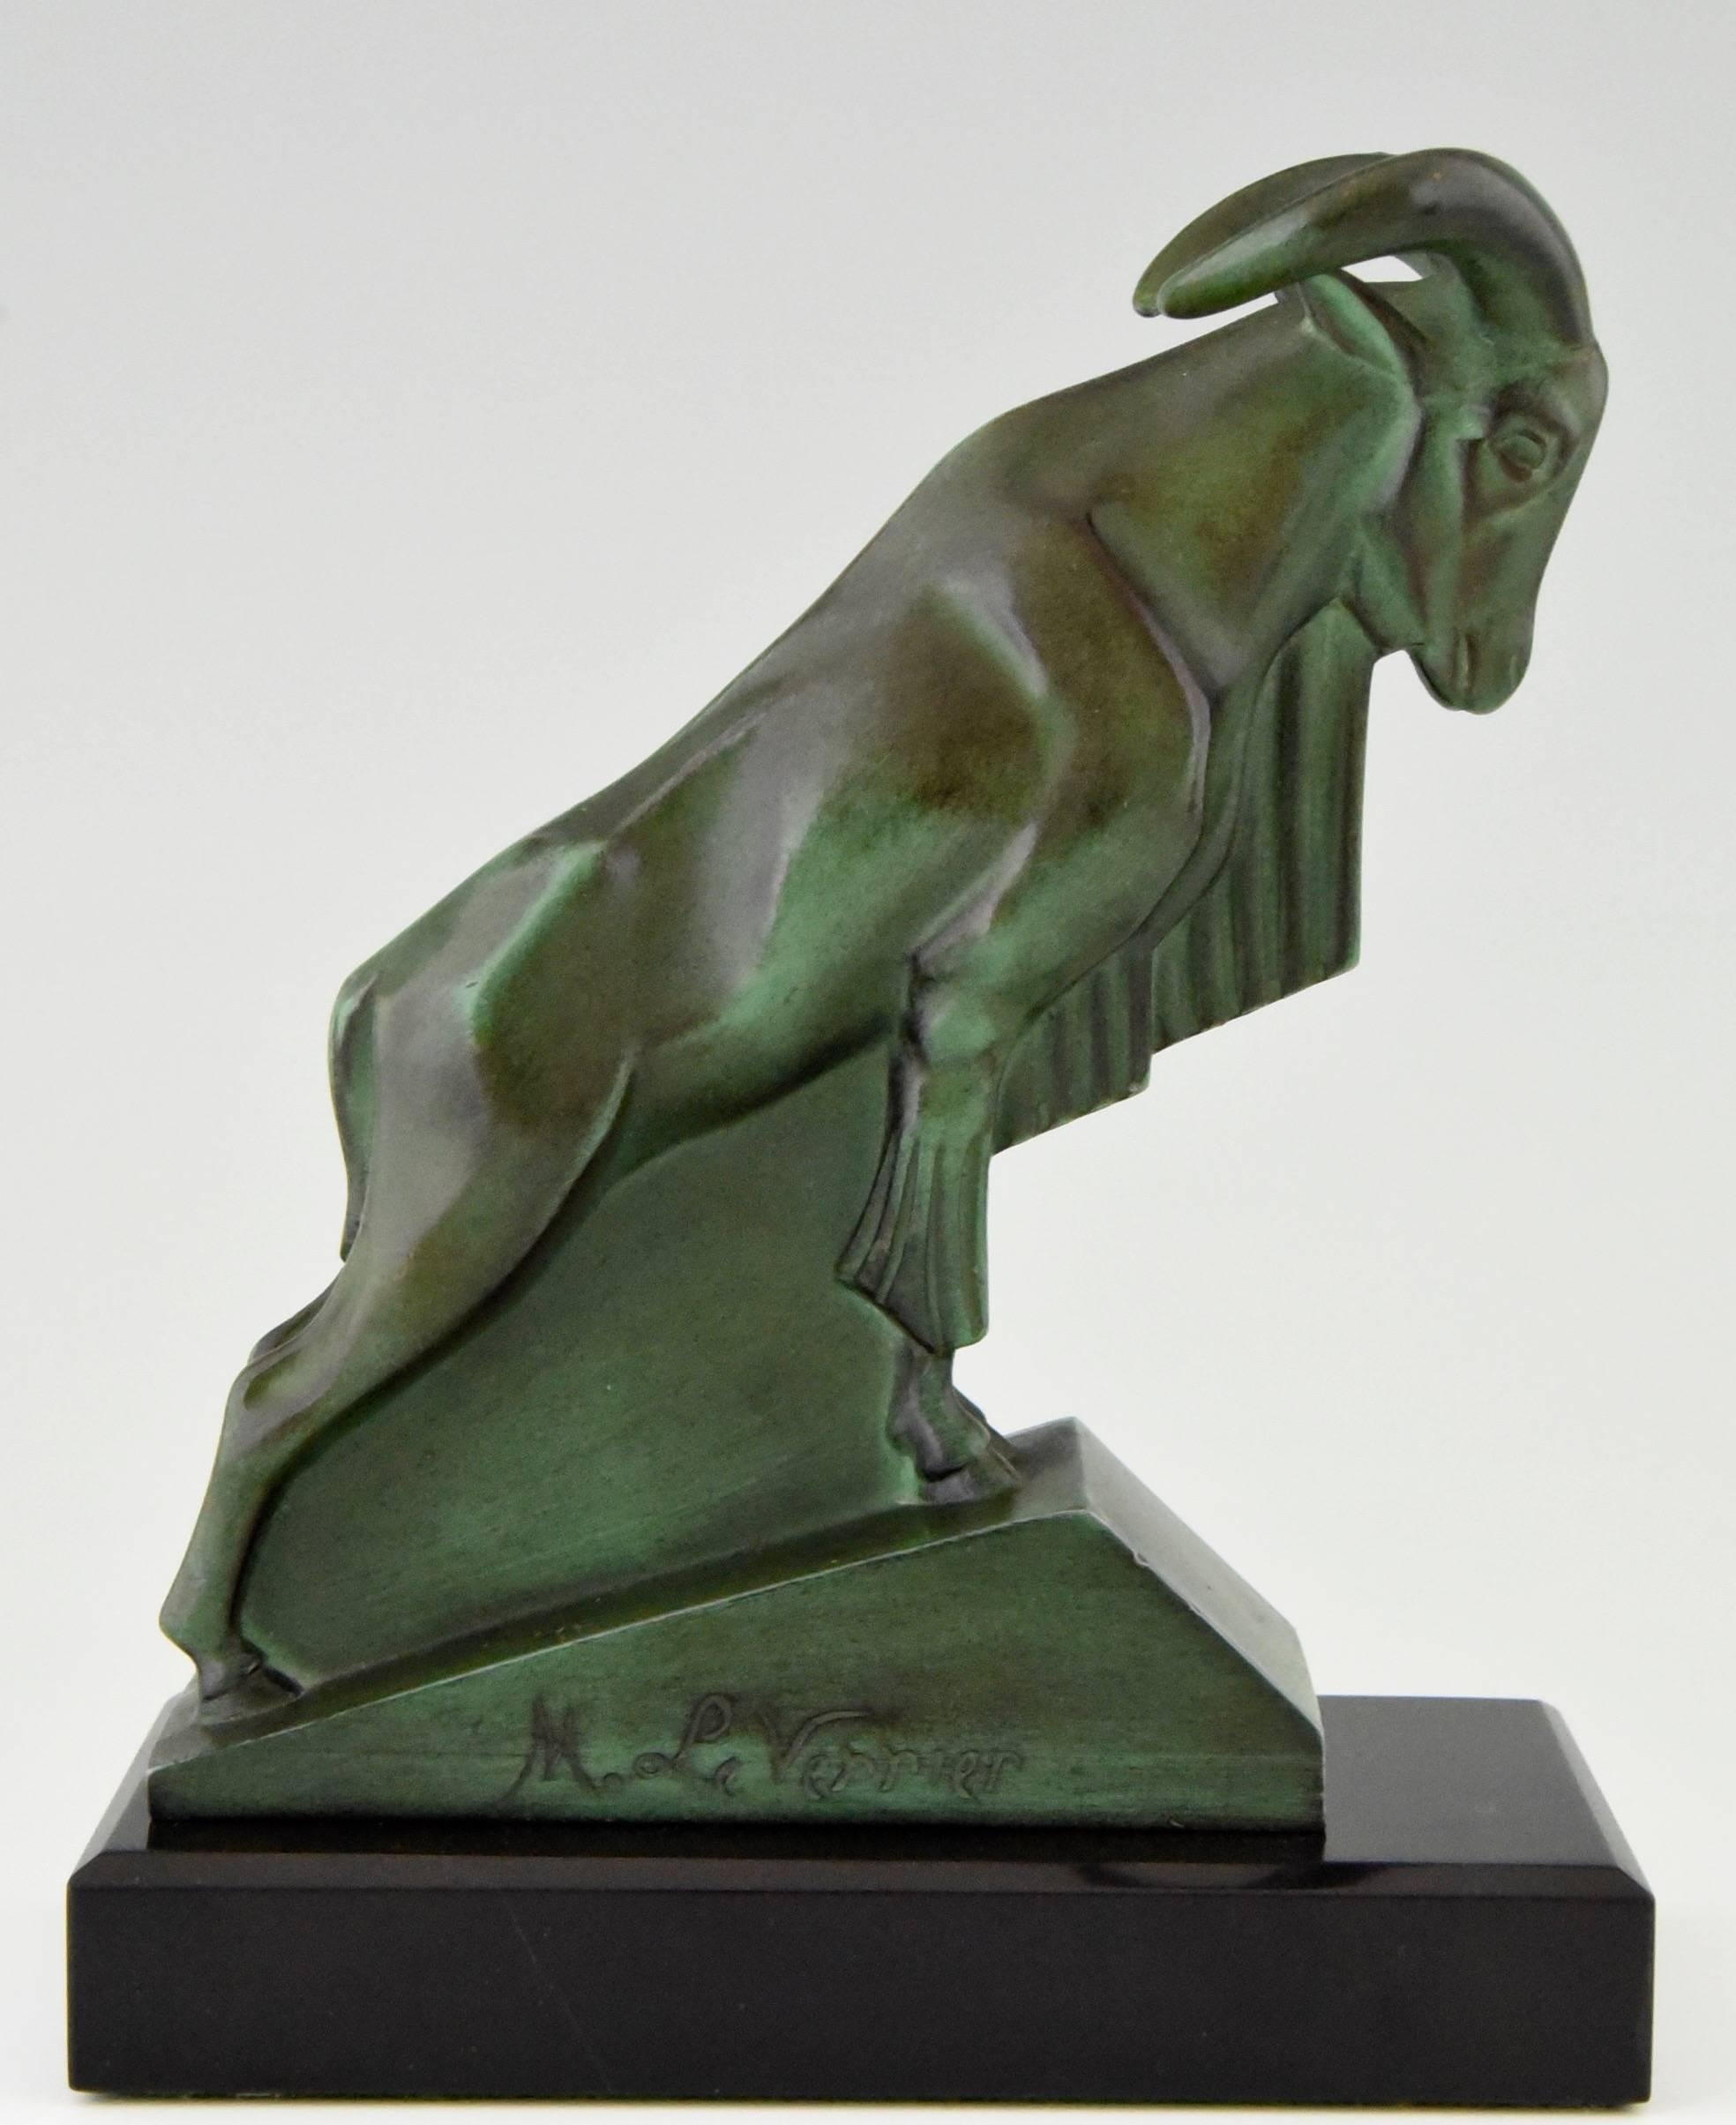 20th Century French Art Deco Ram Bookends by Max Le Verrier, 1930